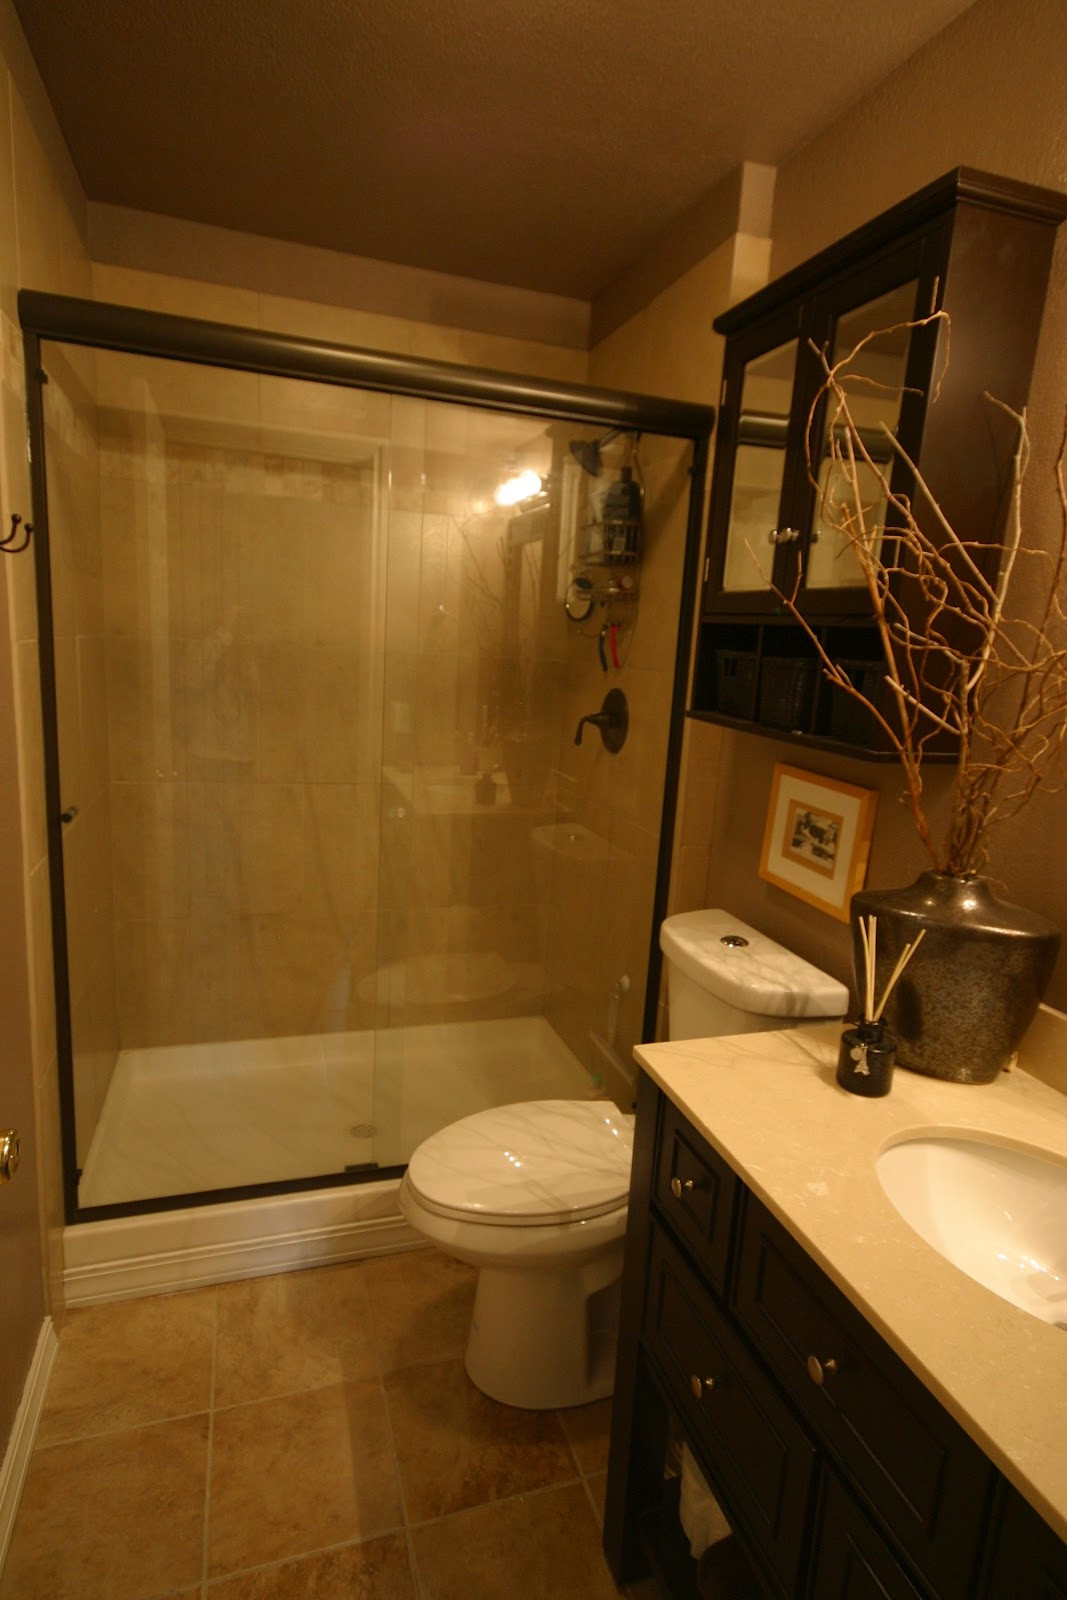 Remodeling Small Bathrooms
 Small Bathroom Remodels Maximal Outlook in Minimal Space